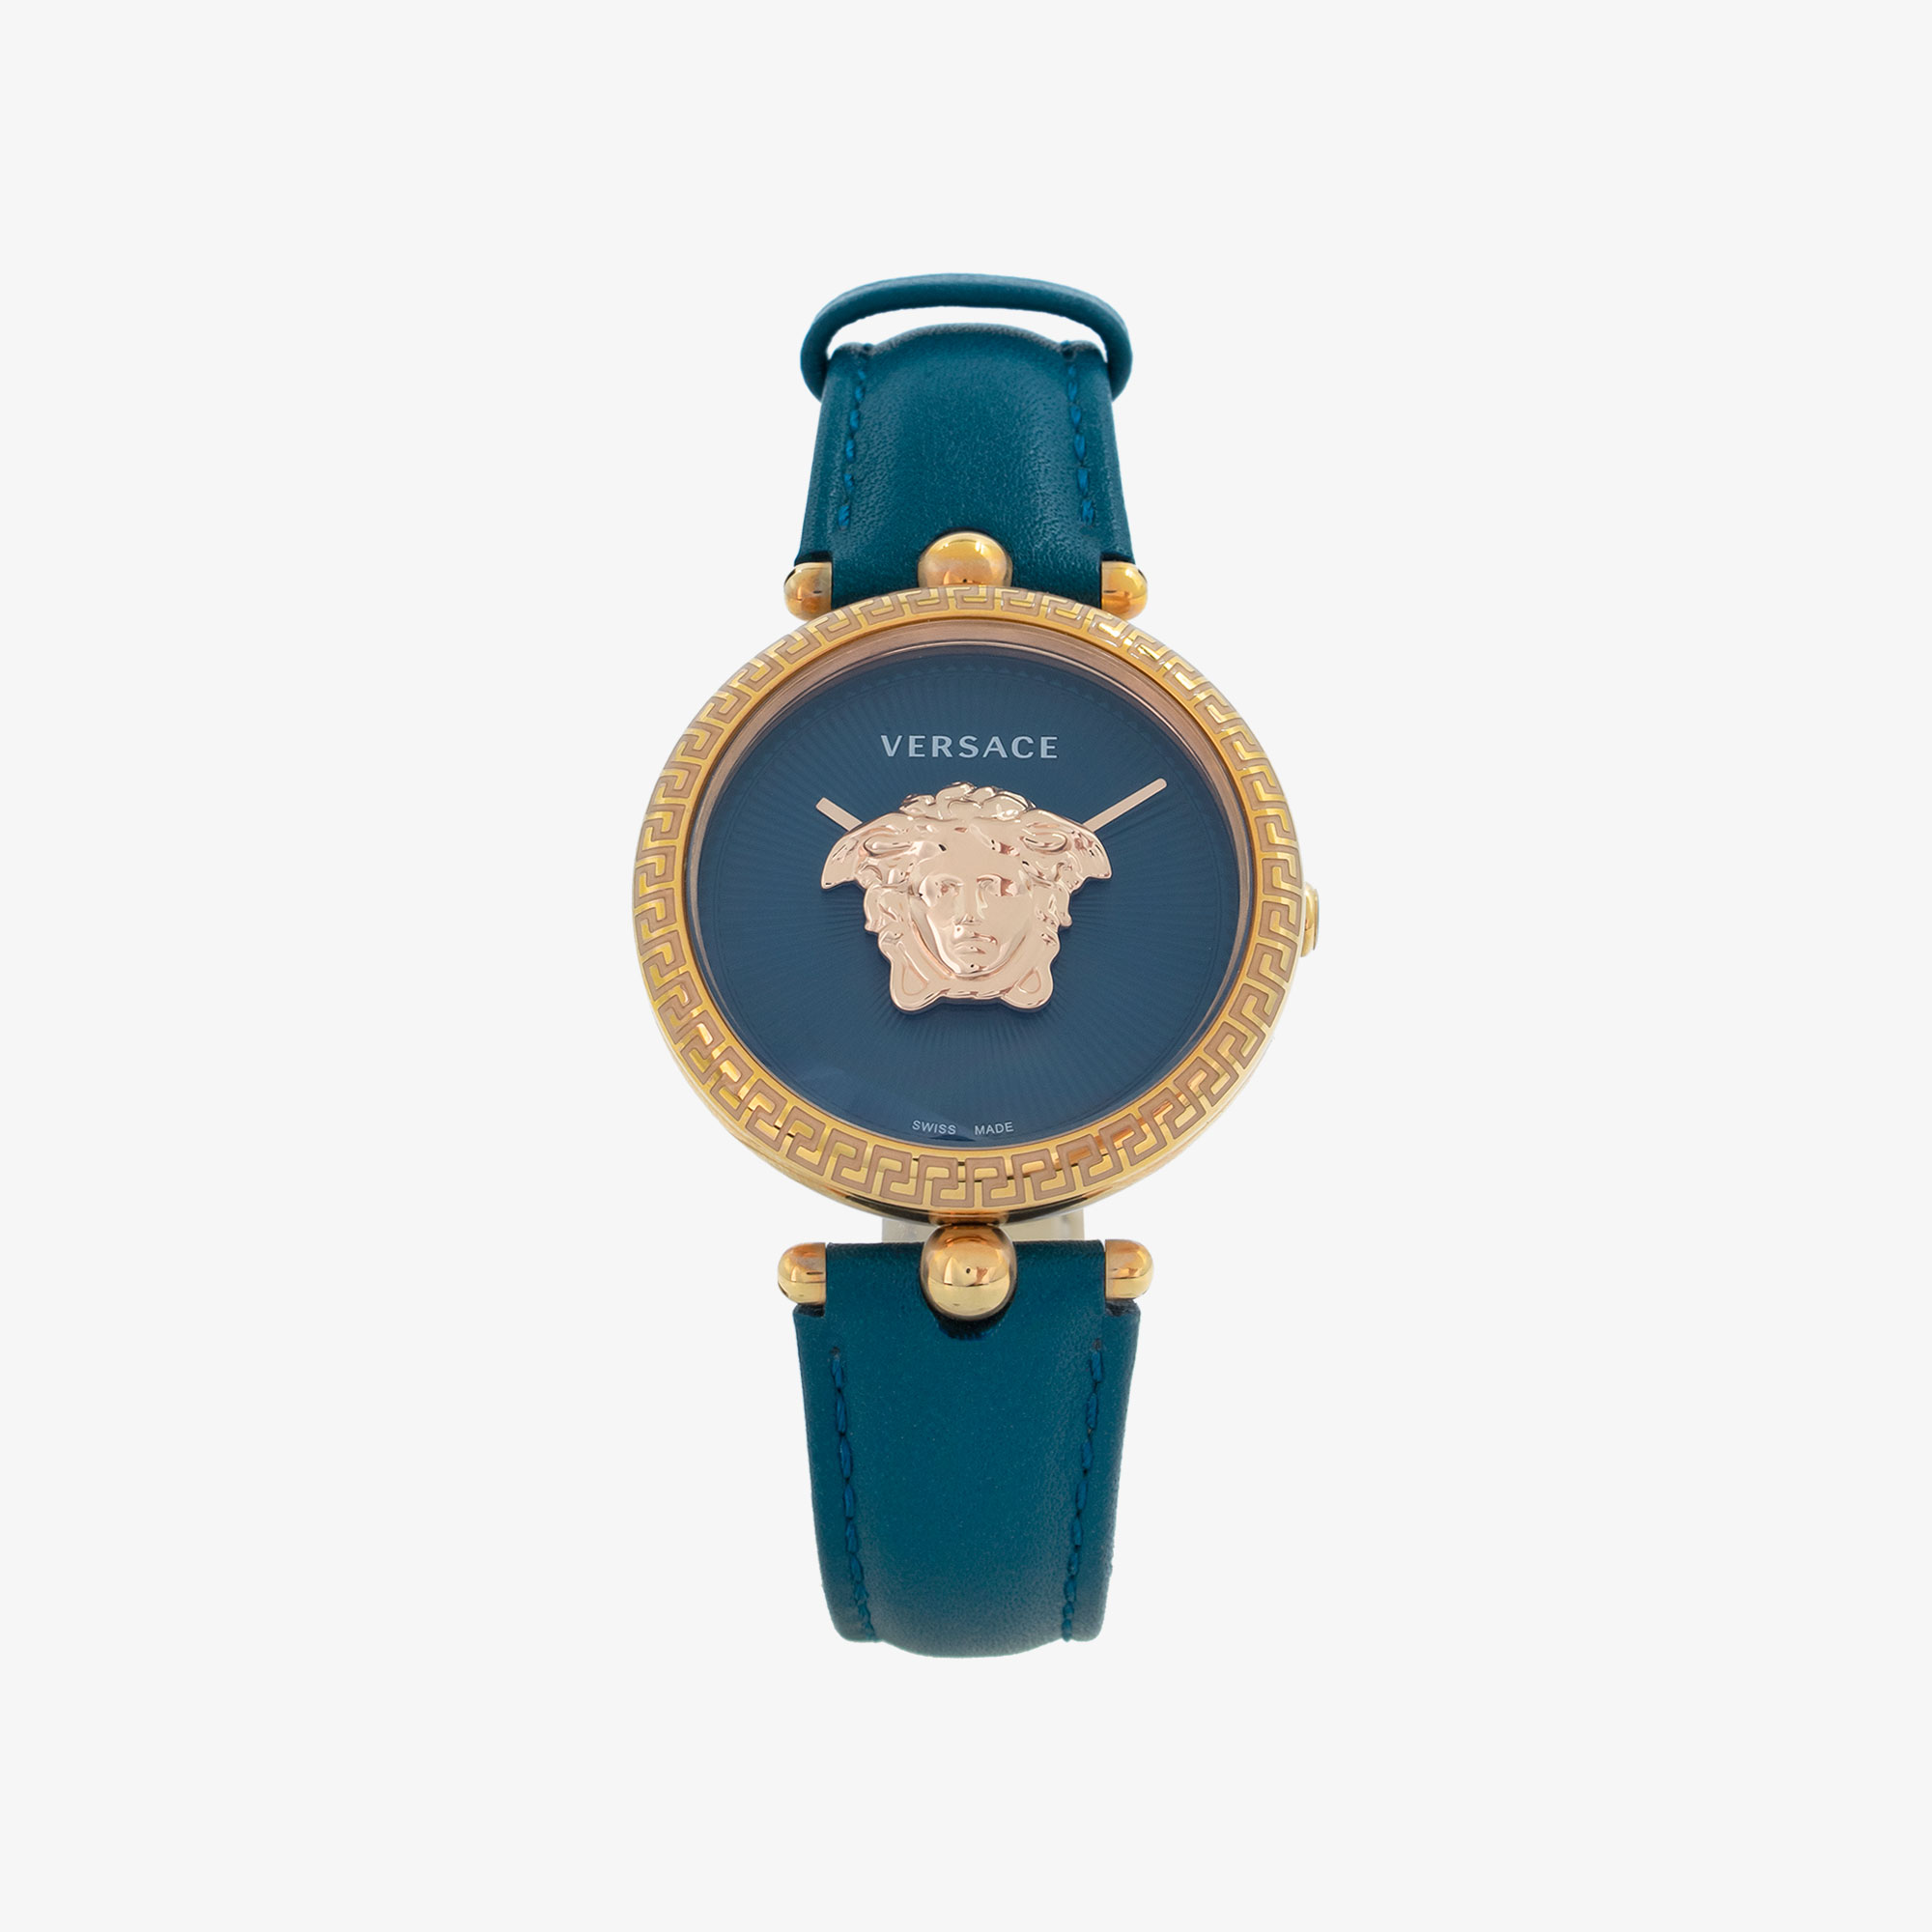 VERSACE PALAZZO EMPIRE ROSE GOLD WATCH WITH PETROL LEATHER STRAP